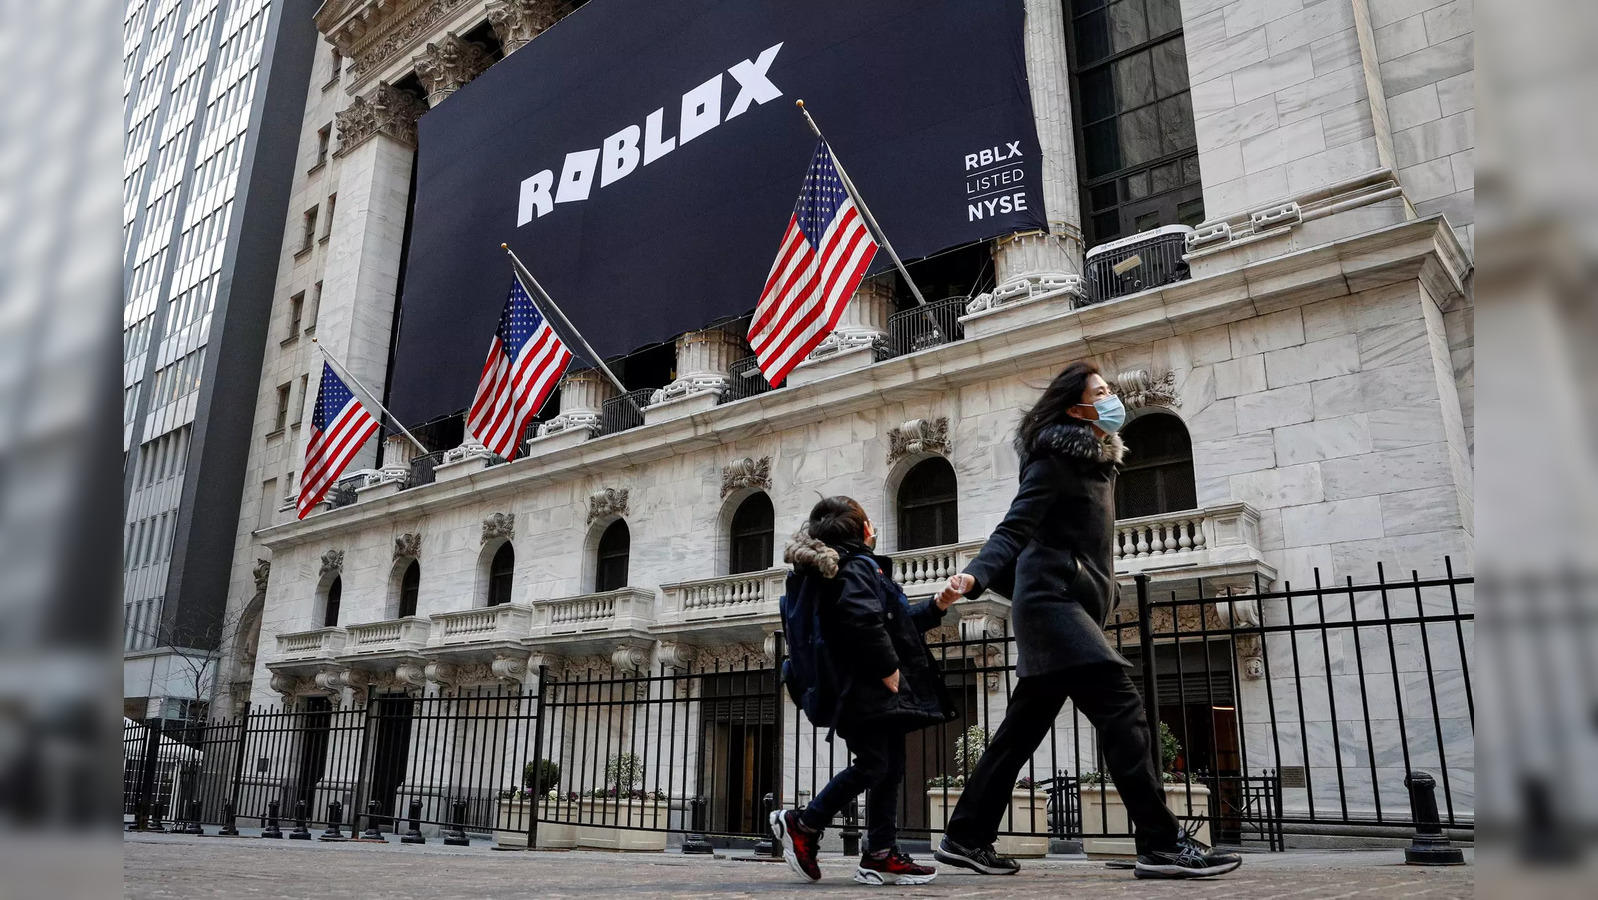 Roblox gaming community and developer's tool misses earnings, revenue  estimates, closes lower